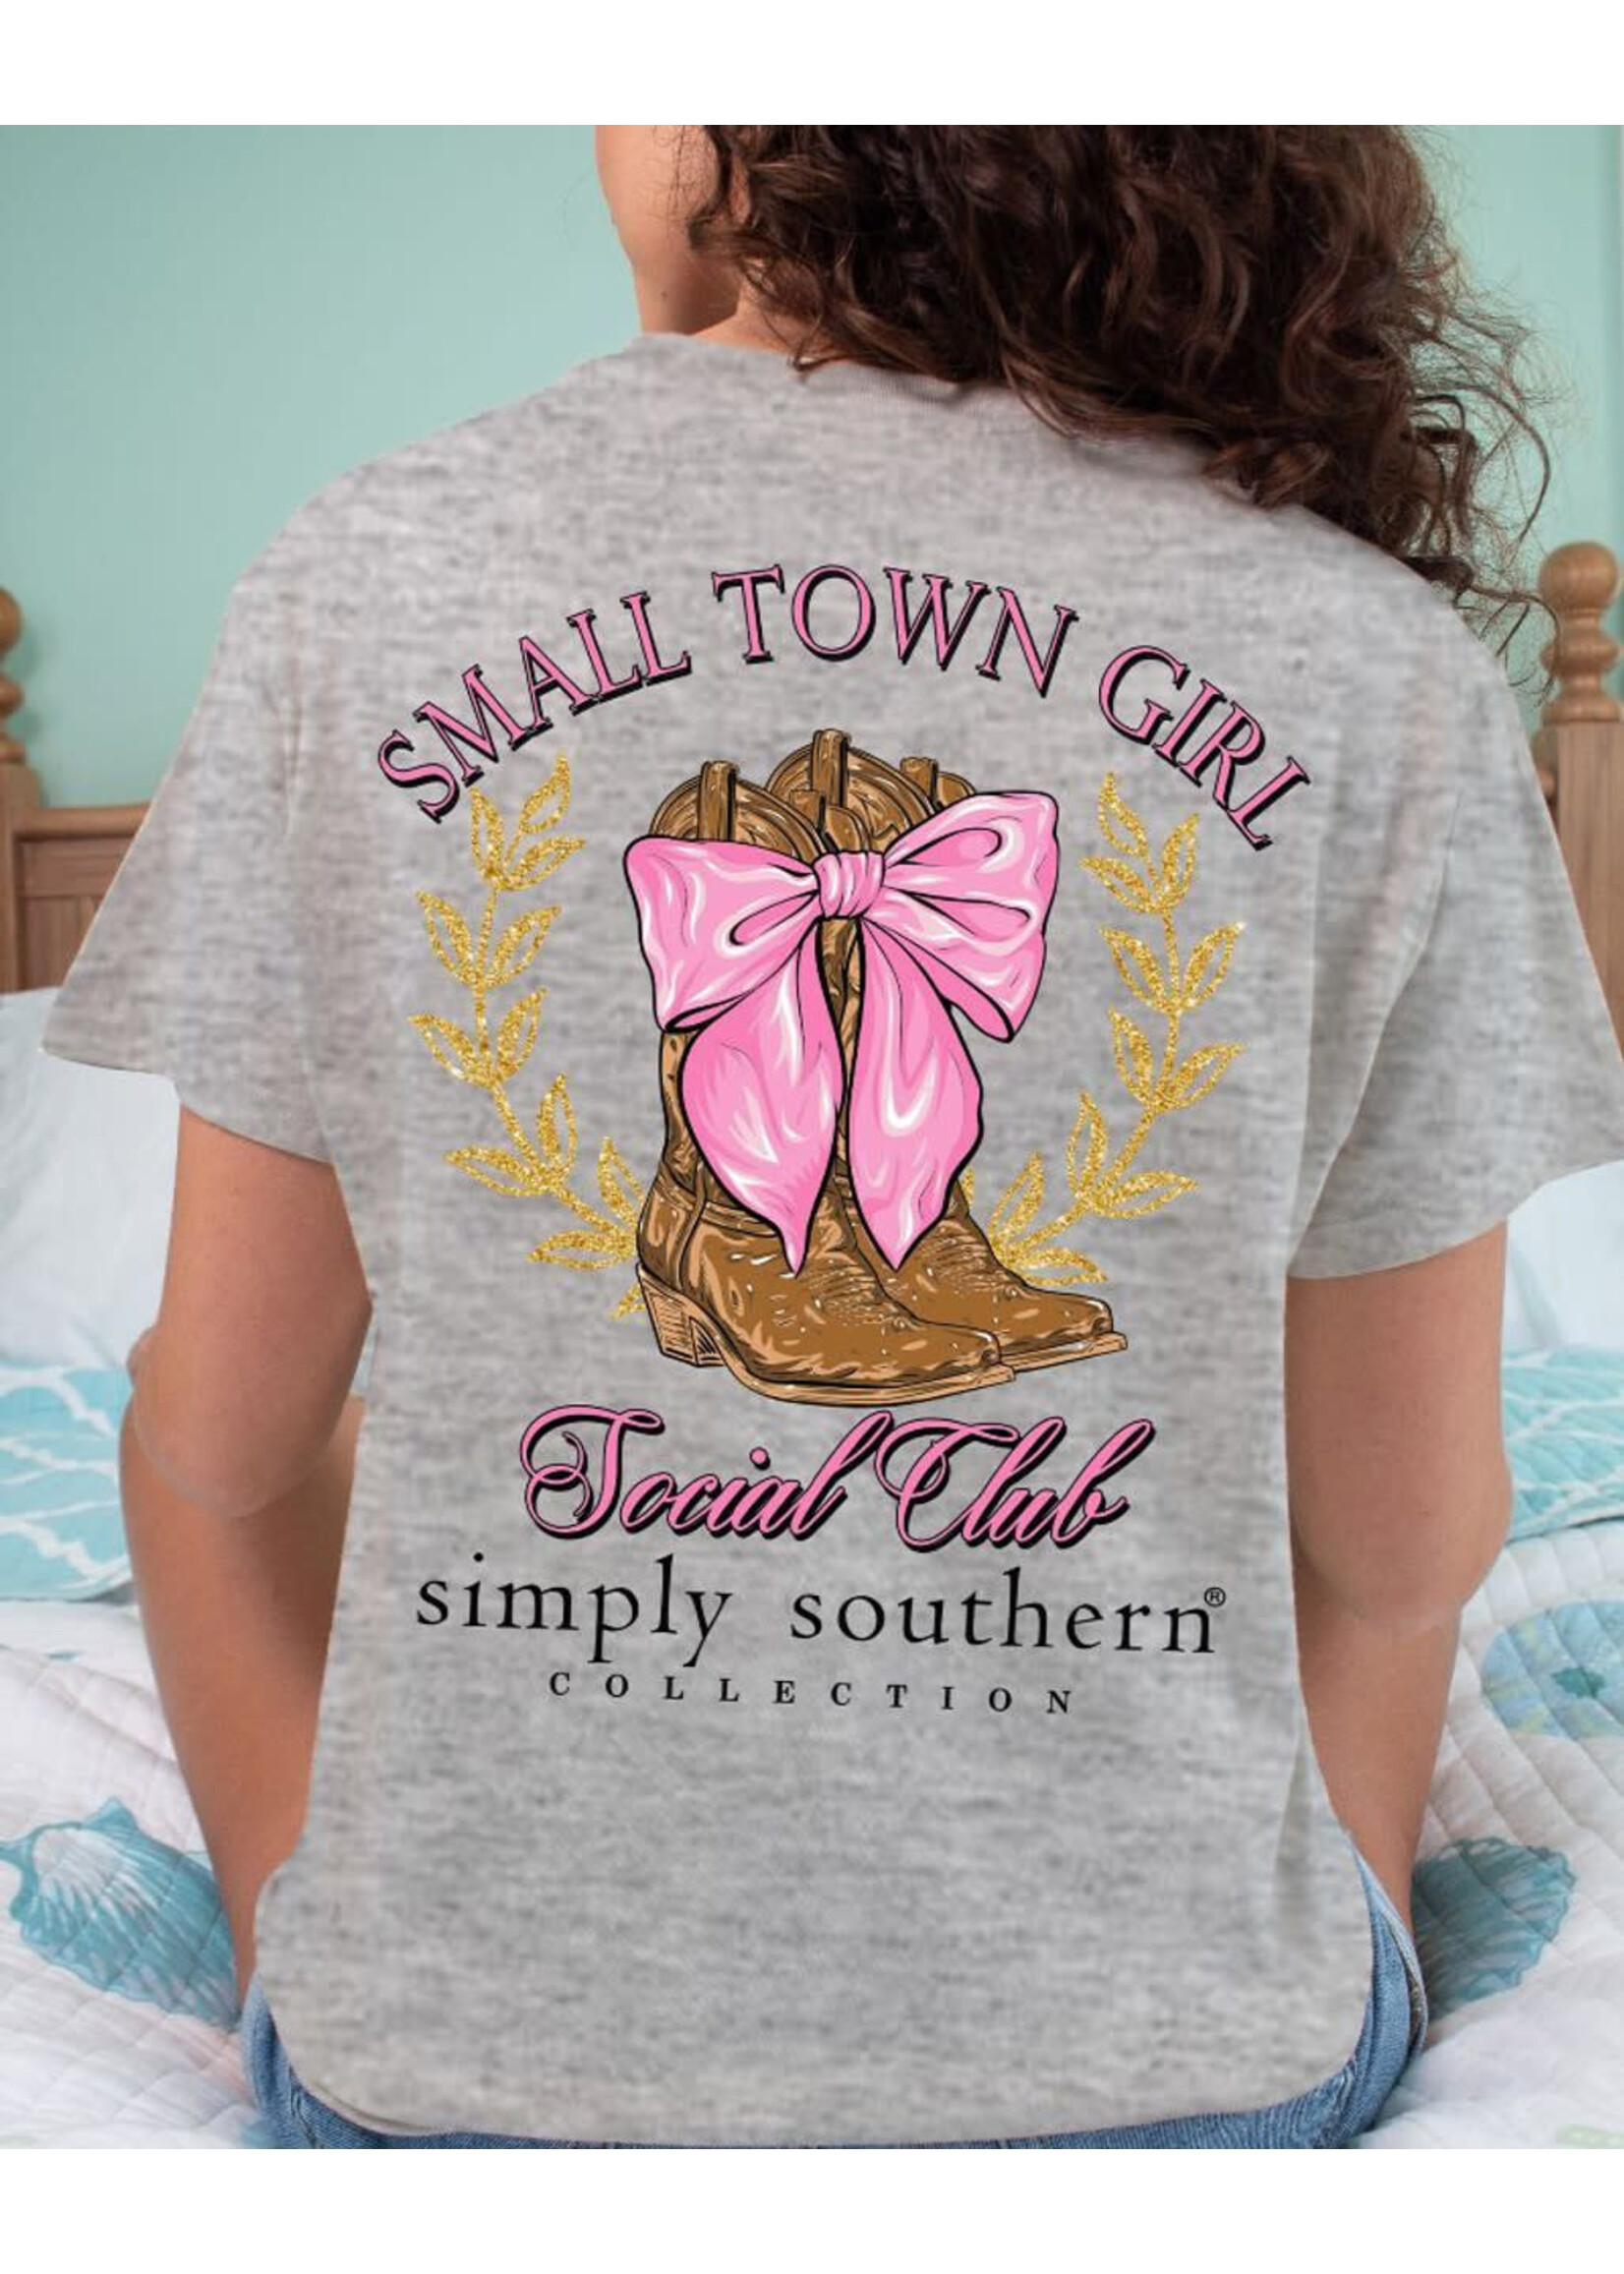 Simply Southern Collection Small Town Girl SS Tee